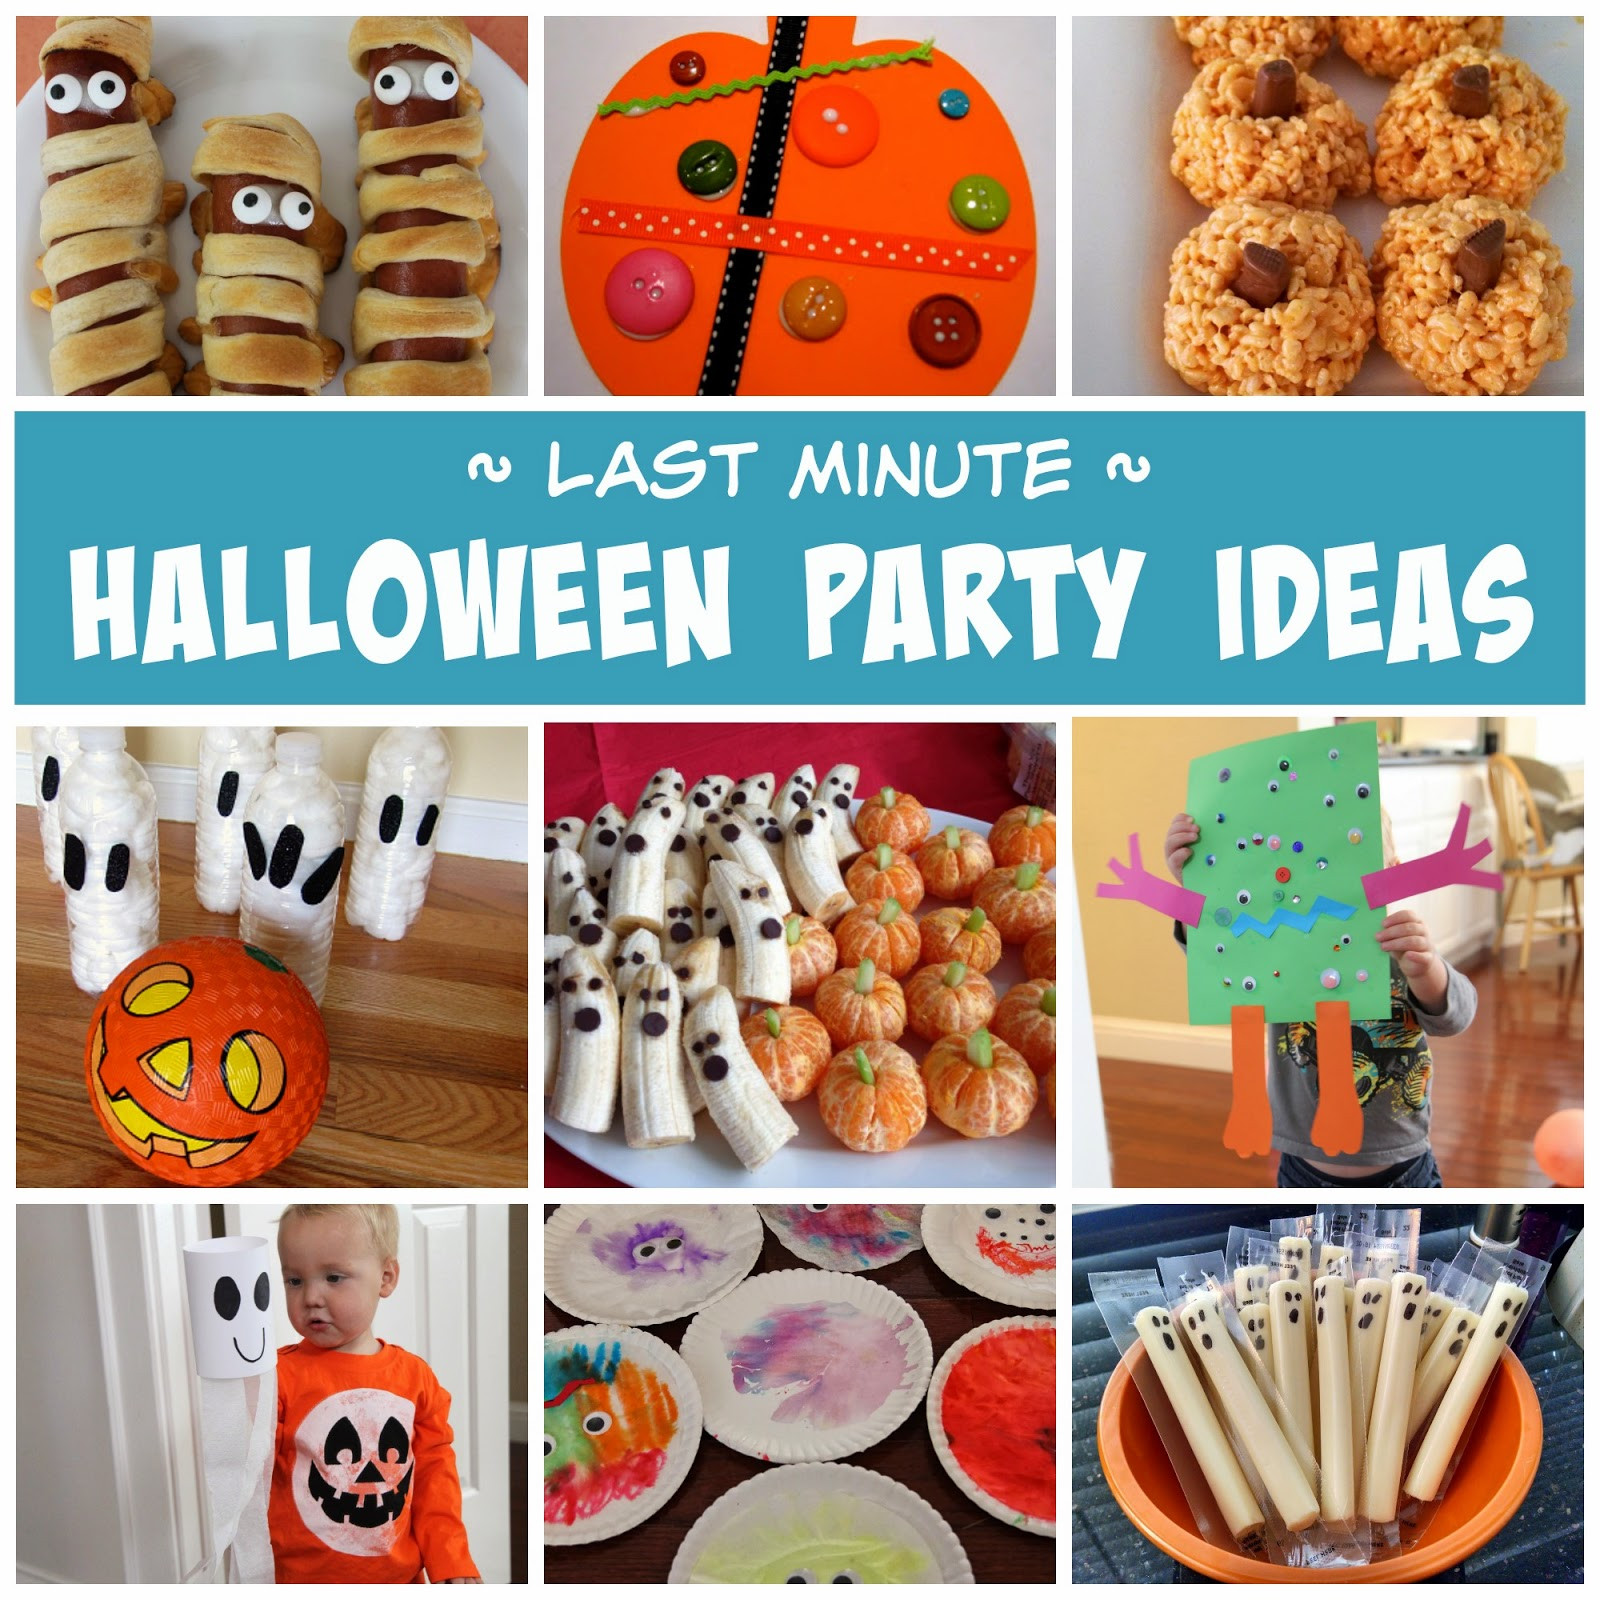 Toddlers Halloween Party Ideas
 Toddler Approved Last Minute Halloween Party Ideas